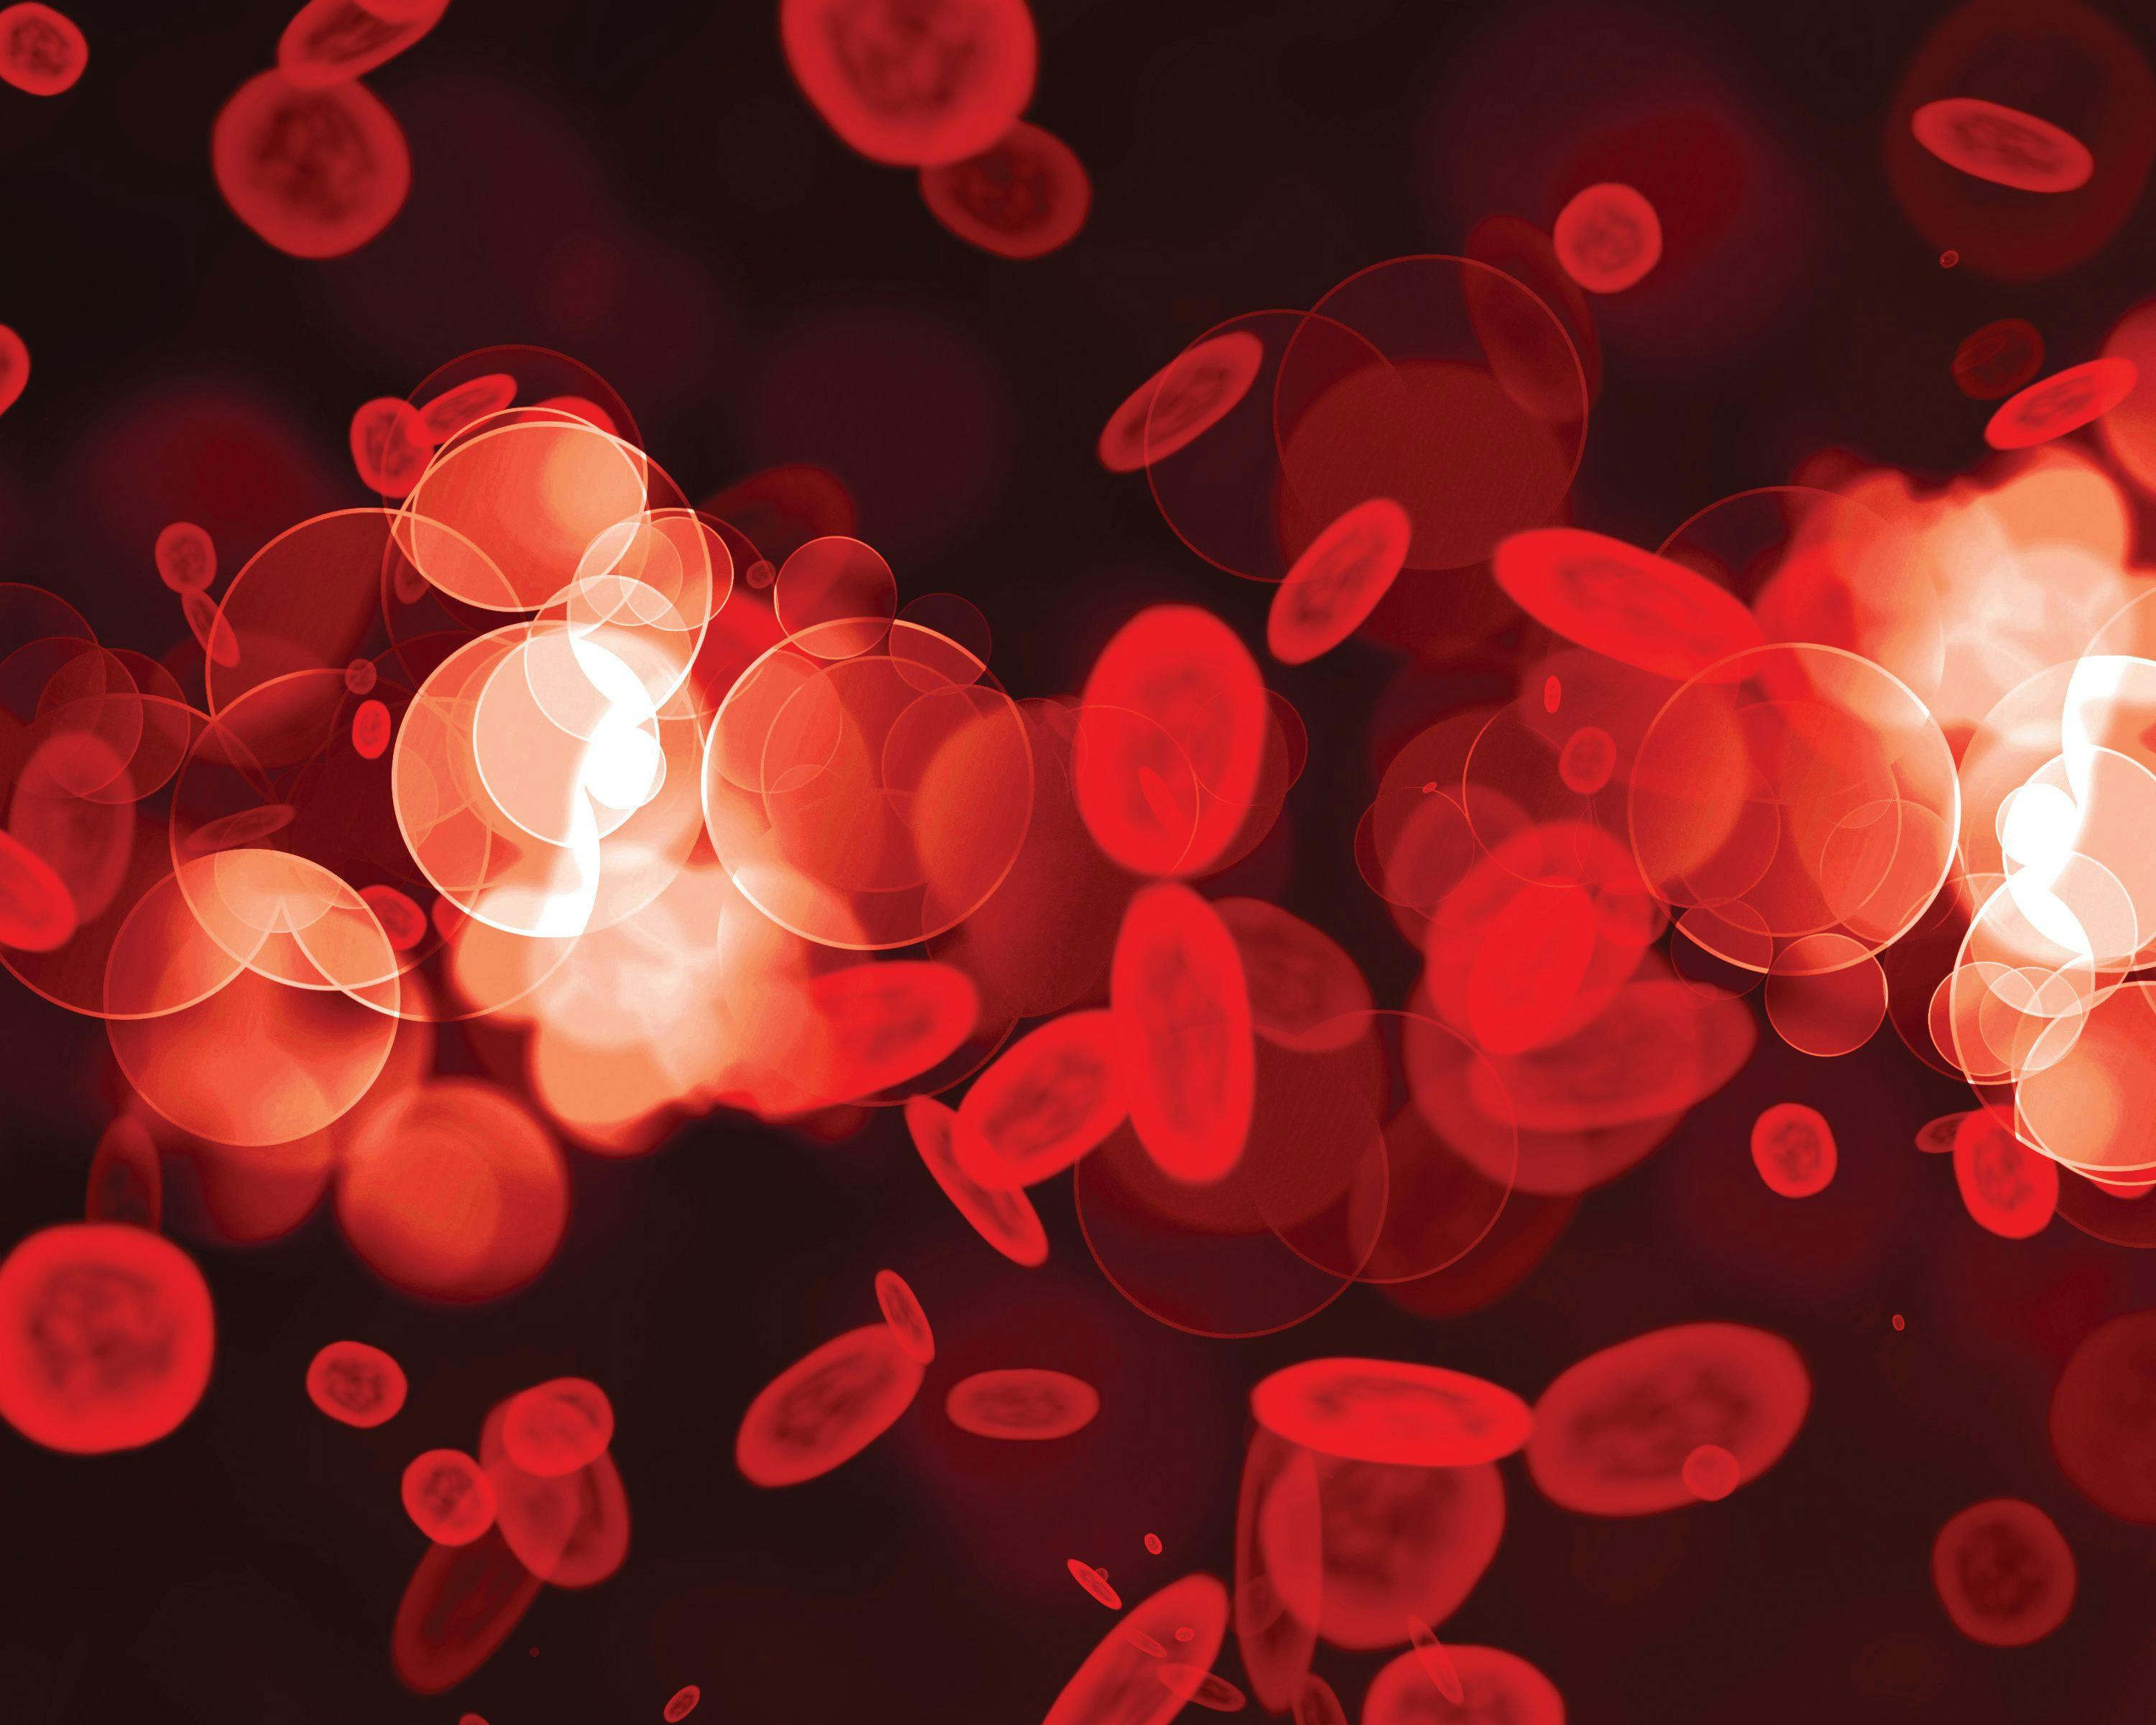 Bomedemstat Demonstrates Early Promise in Advanced Myelofibrosis